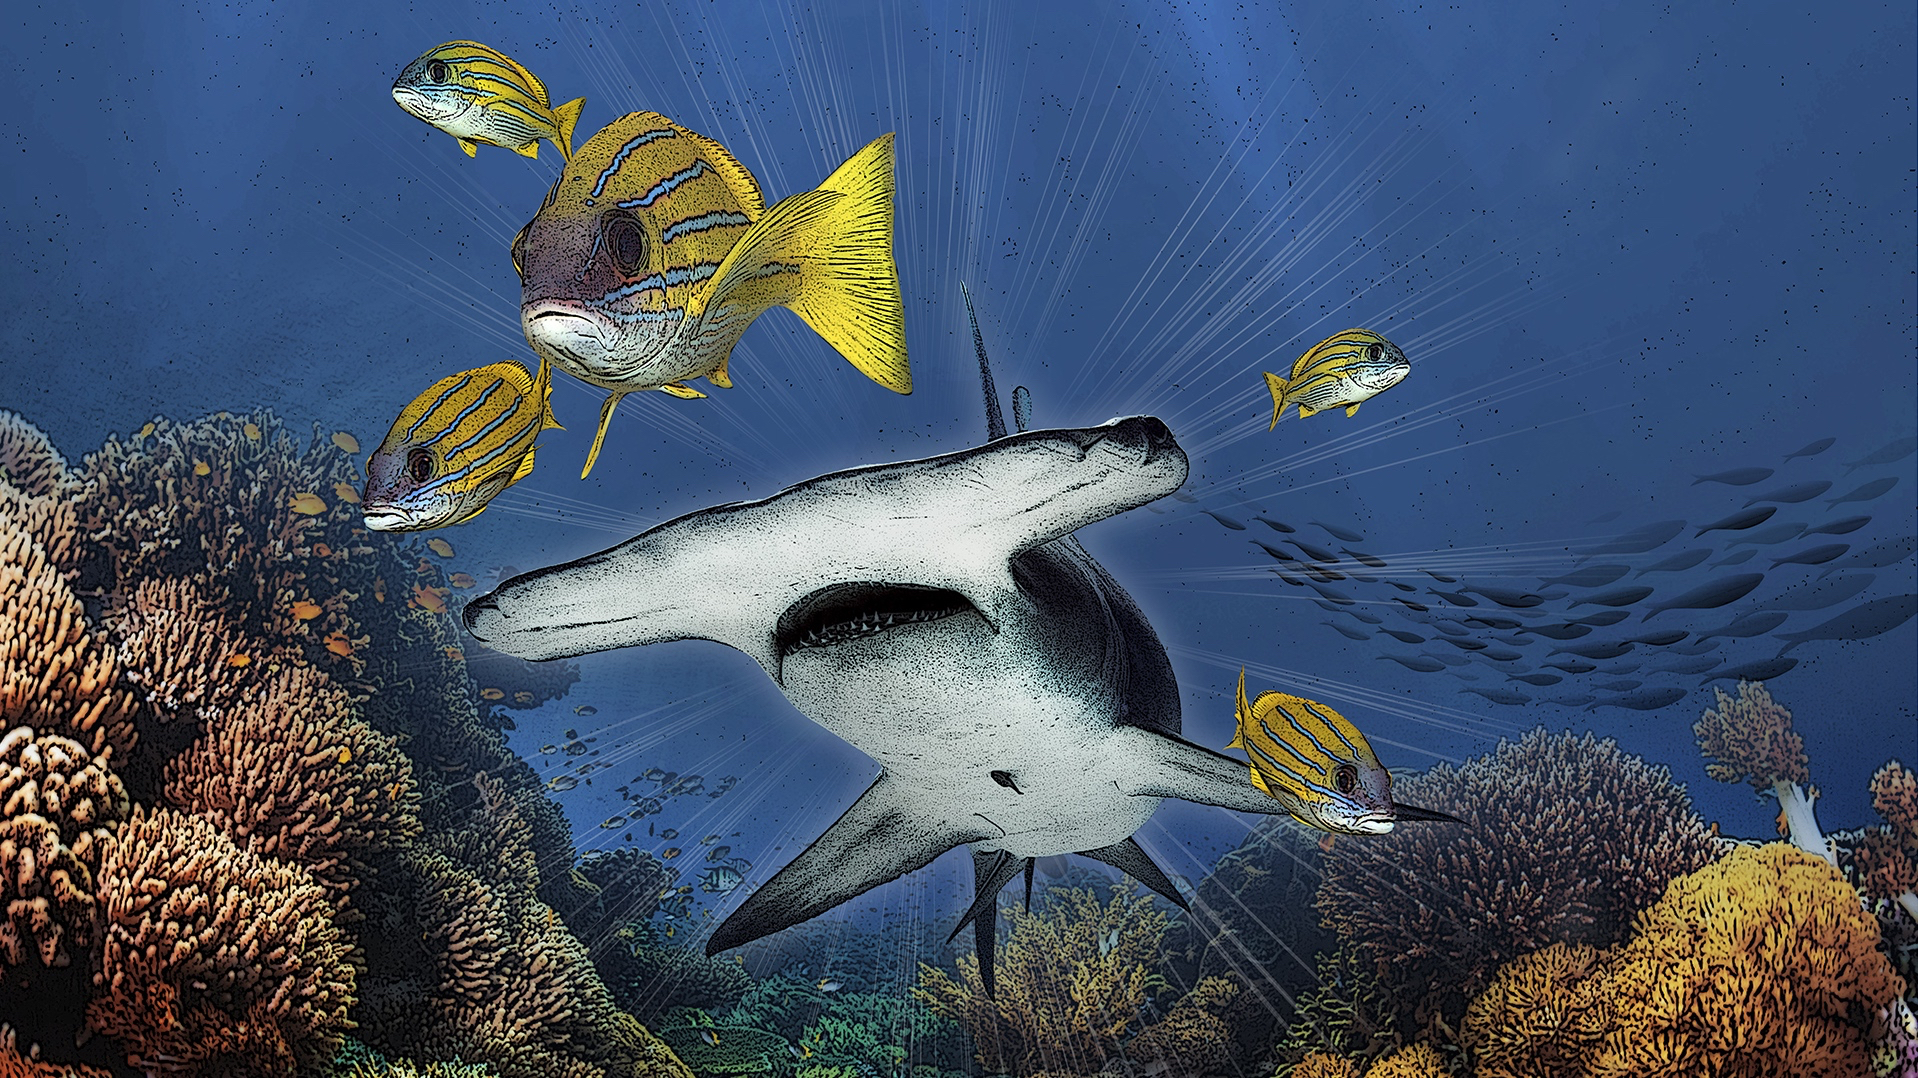 New Study Suggests Shark Declines Can Lead to Changes in Reef Fish Body Shapes